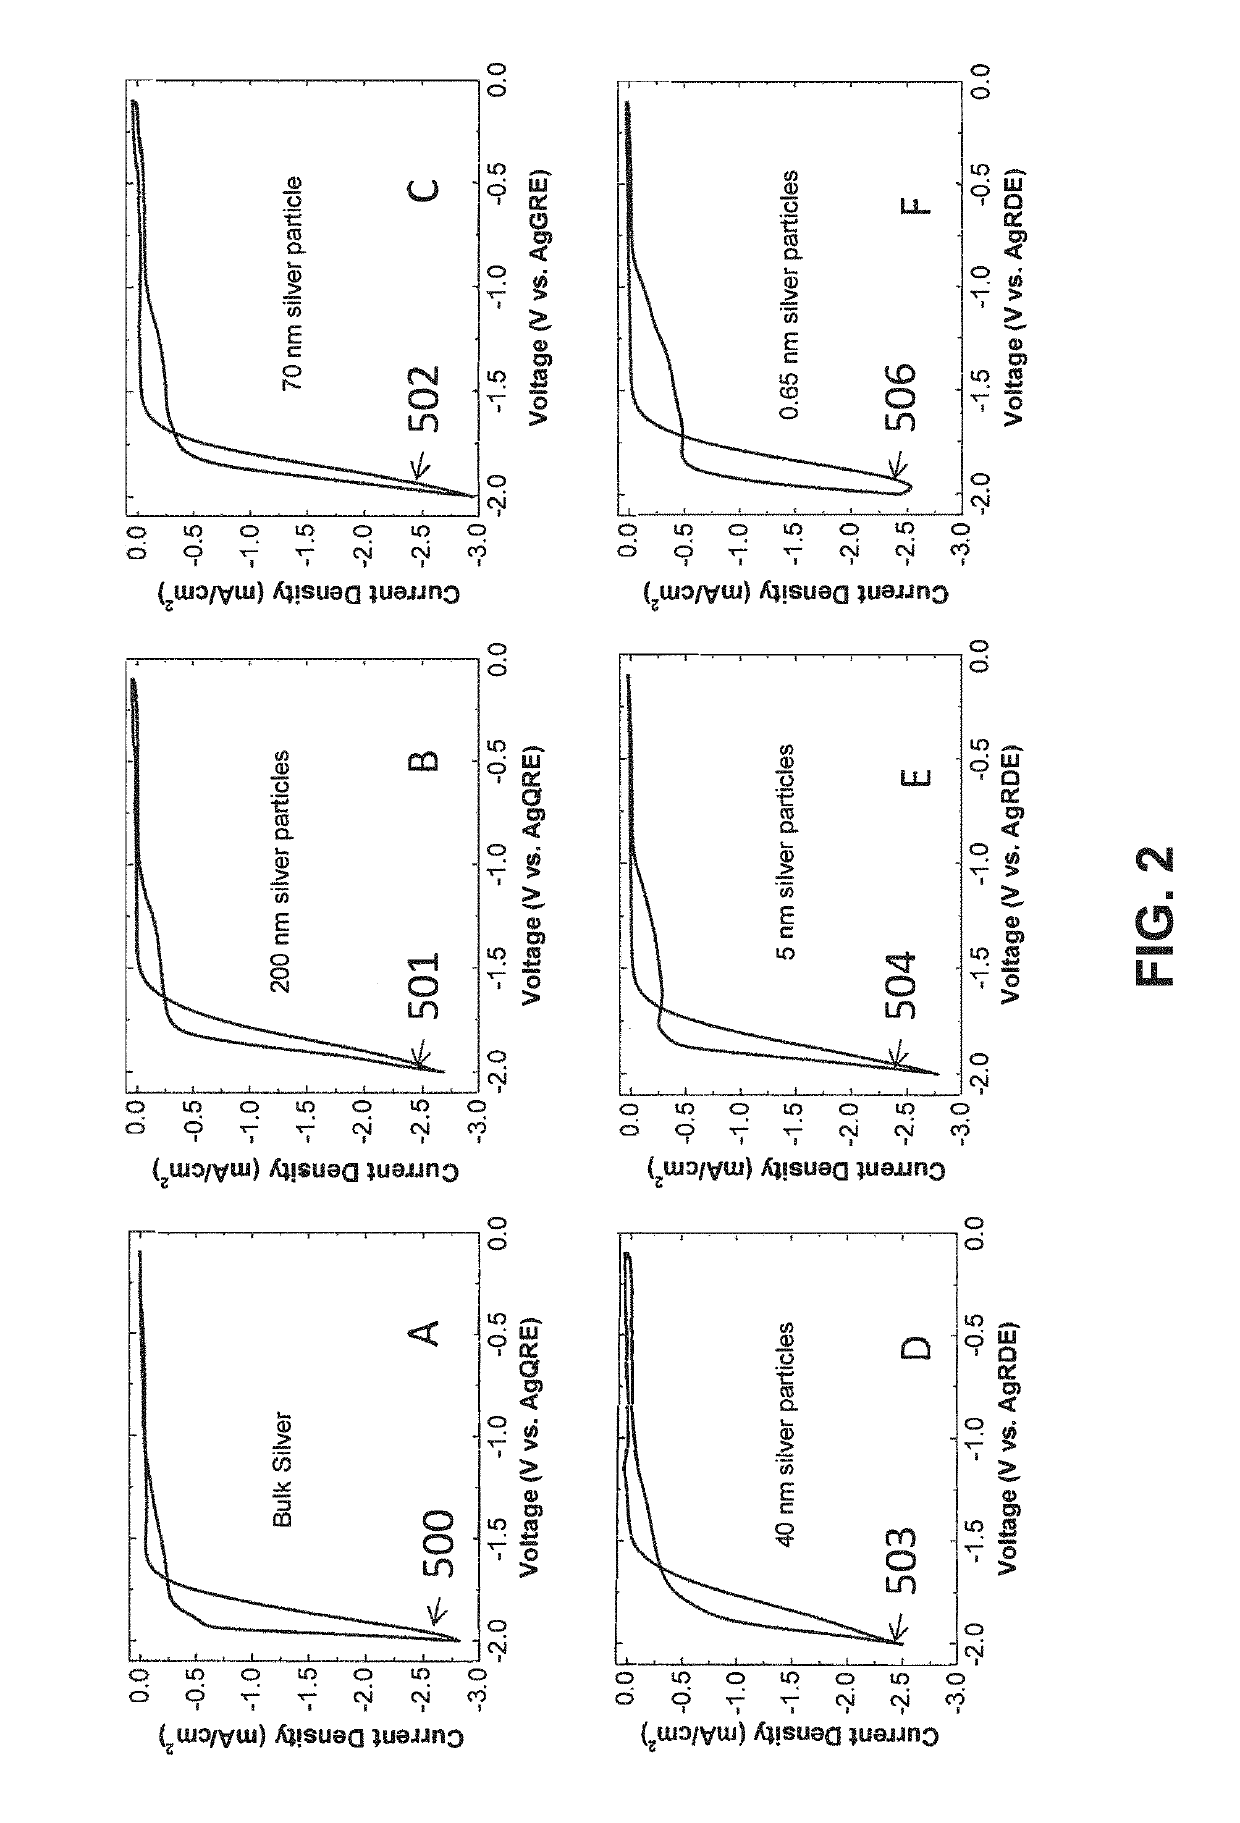 Electrocatalytic Process for Carbon Dioxide Conversion